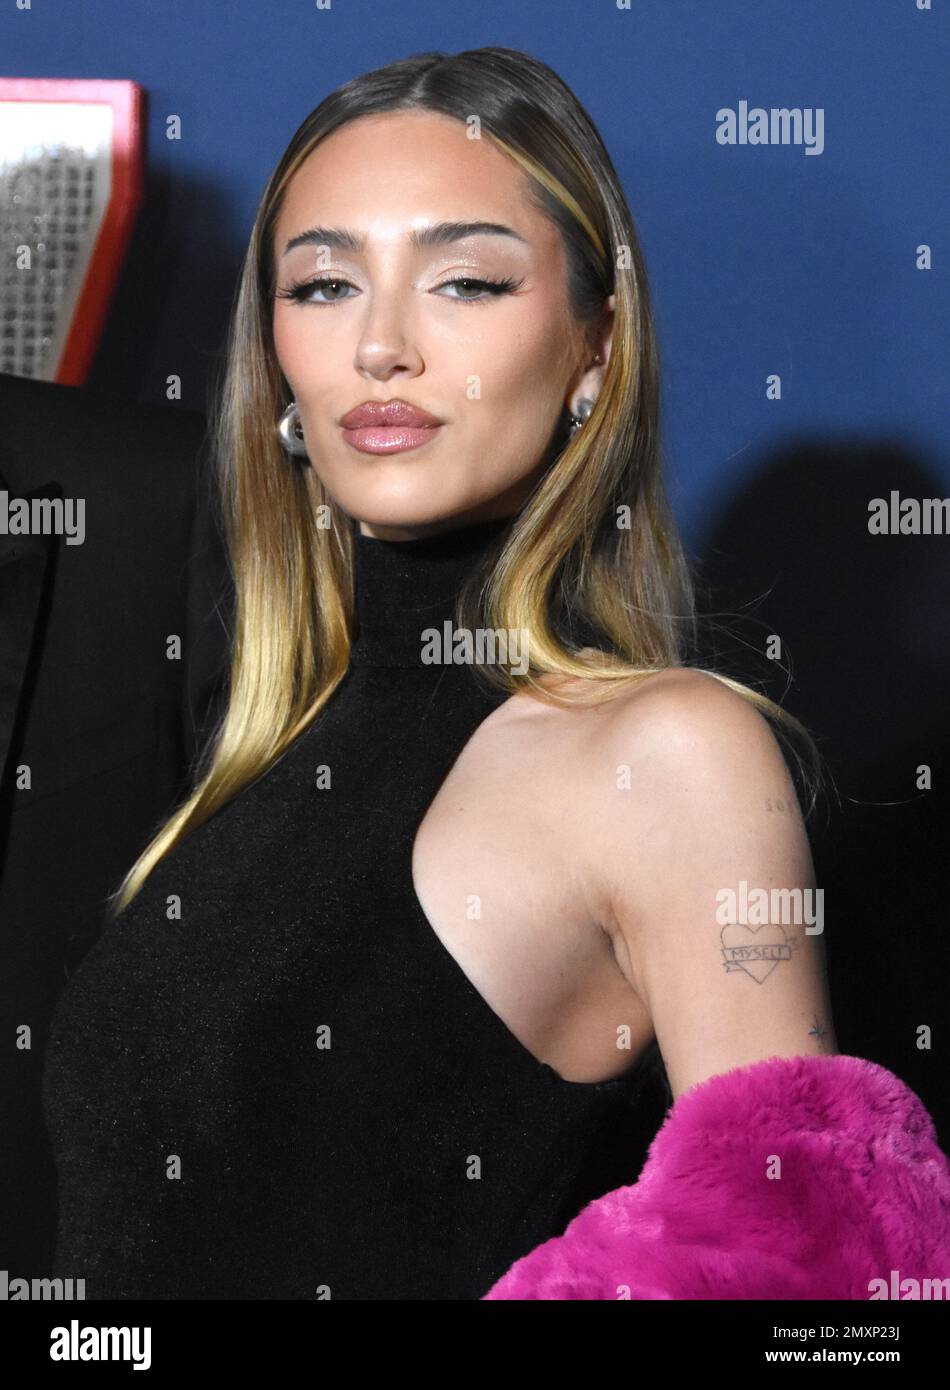 Los Angeles, California, USA 31st January 2023 Actress Delilah Belle Hamlin attends the Los Angeles Premiere Screening of Paramount Pictures' '80 for Brady' at Regency Village Theatre on January 31, 2023 in Los Angeles, California, USA. Photo by Barry King/Alamy Stock Photo Stock Photo